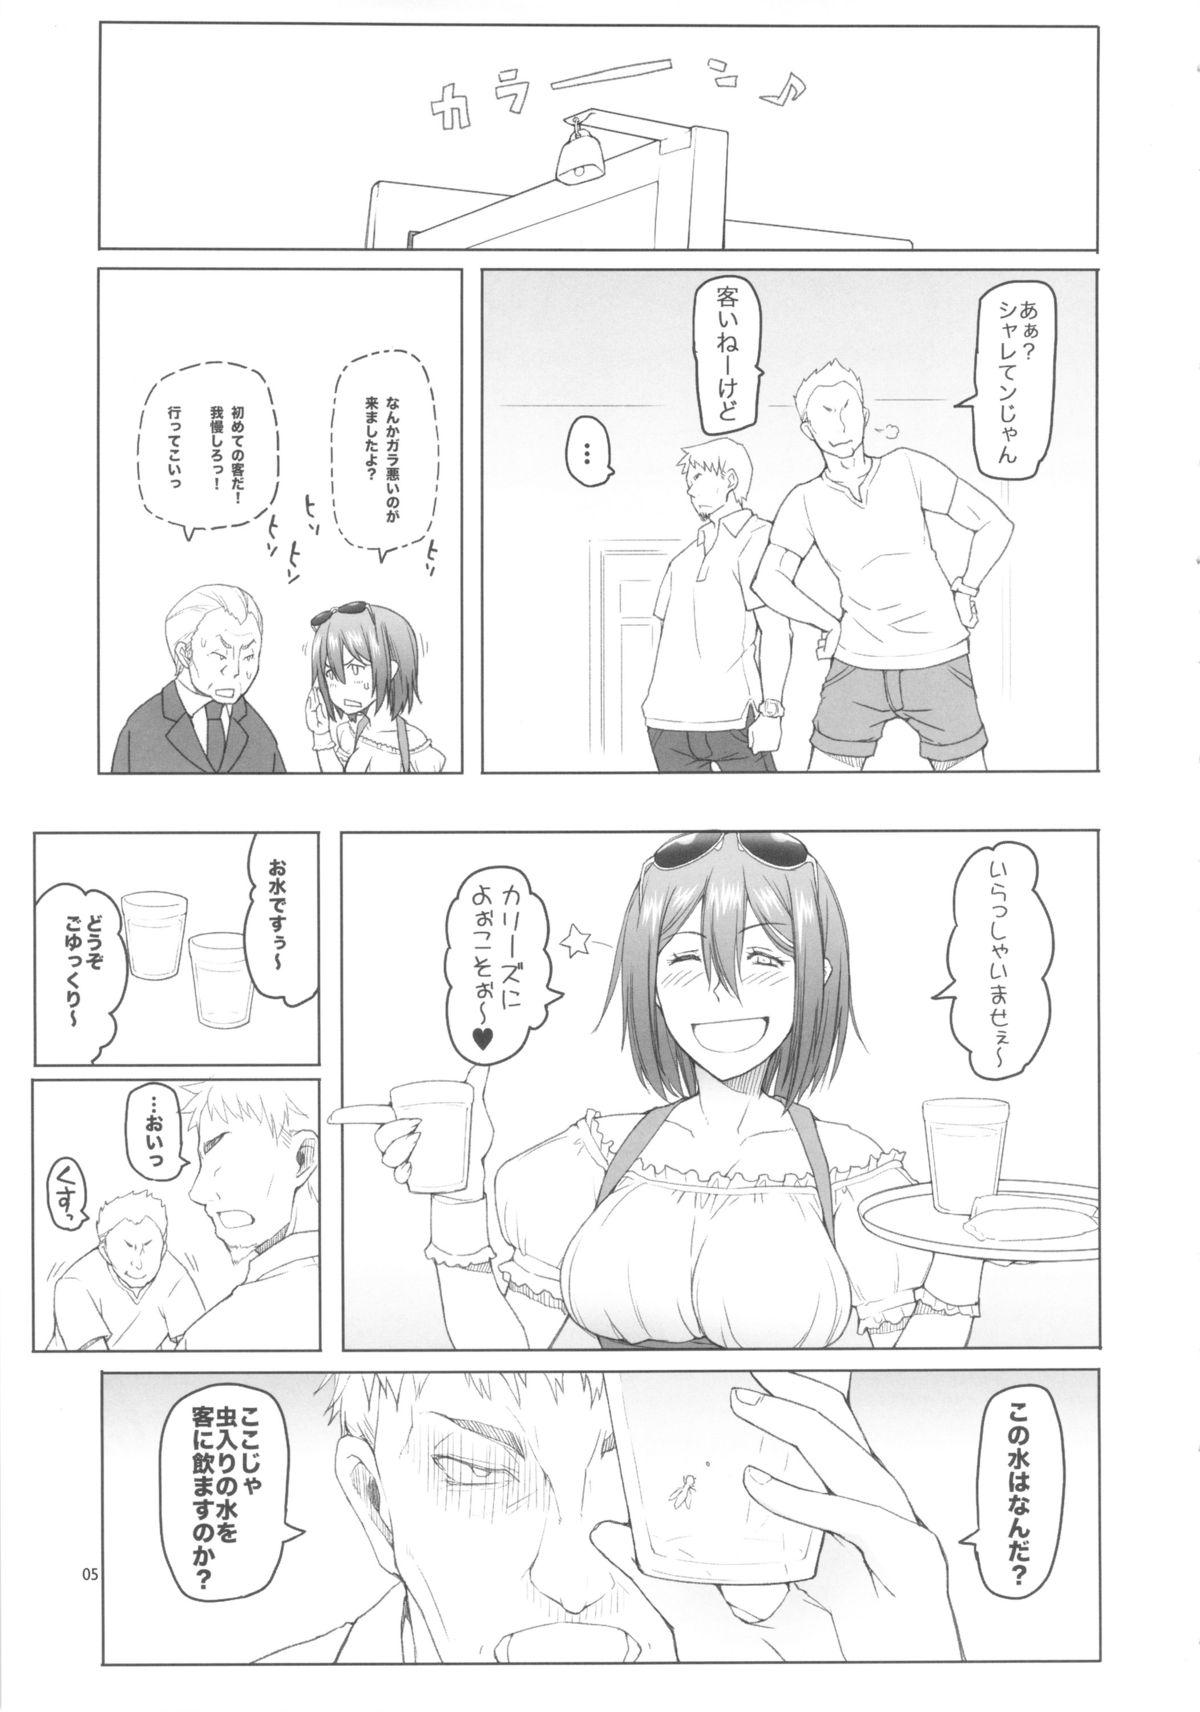 Orgasms MILD LUNCH - Jormungand Foreplay - Page 5